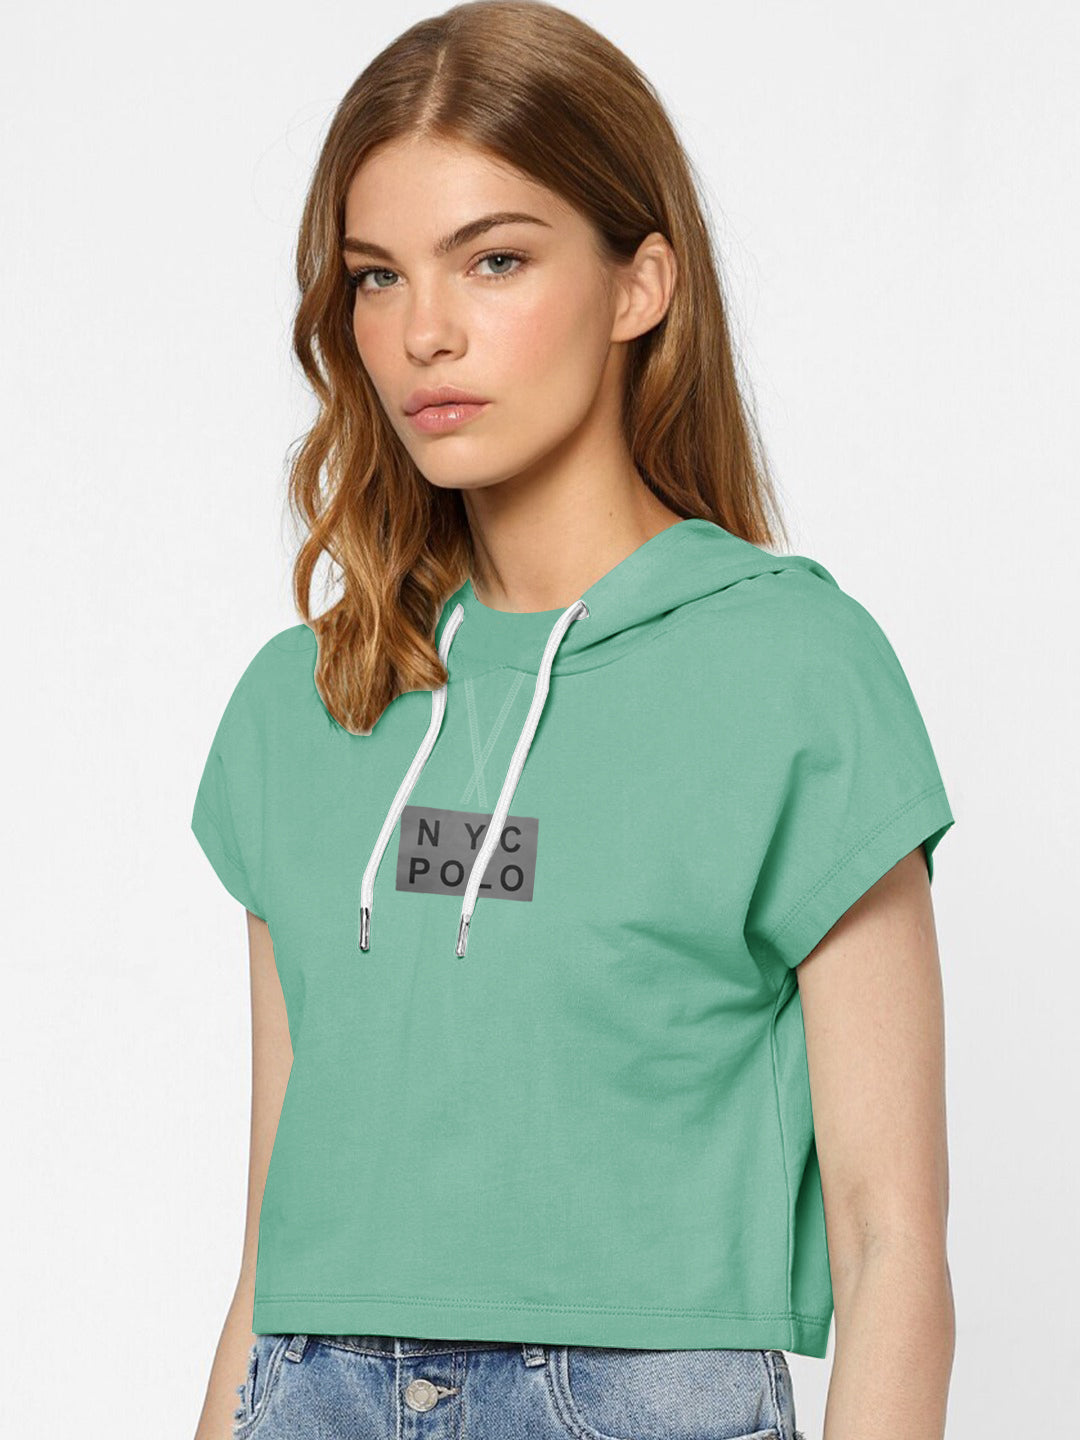 Nyc Polo Fleece Short Length Pullover Hoodie For Ladies-Cyan Green-SP1334